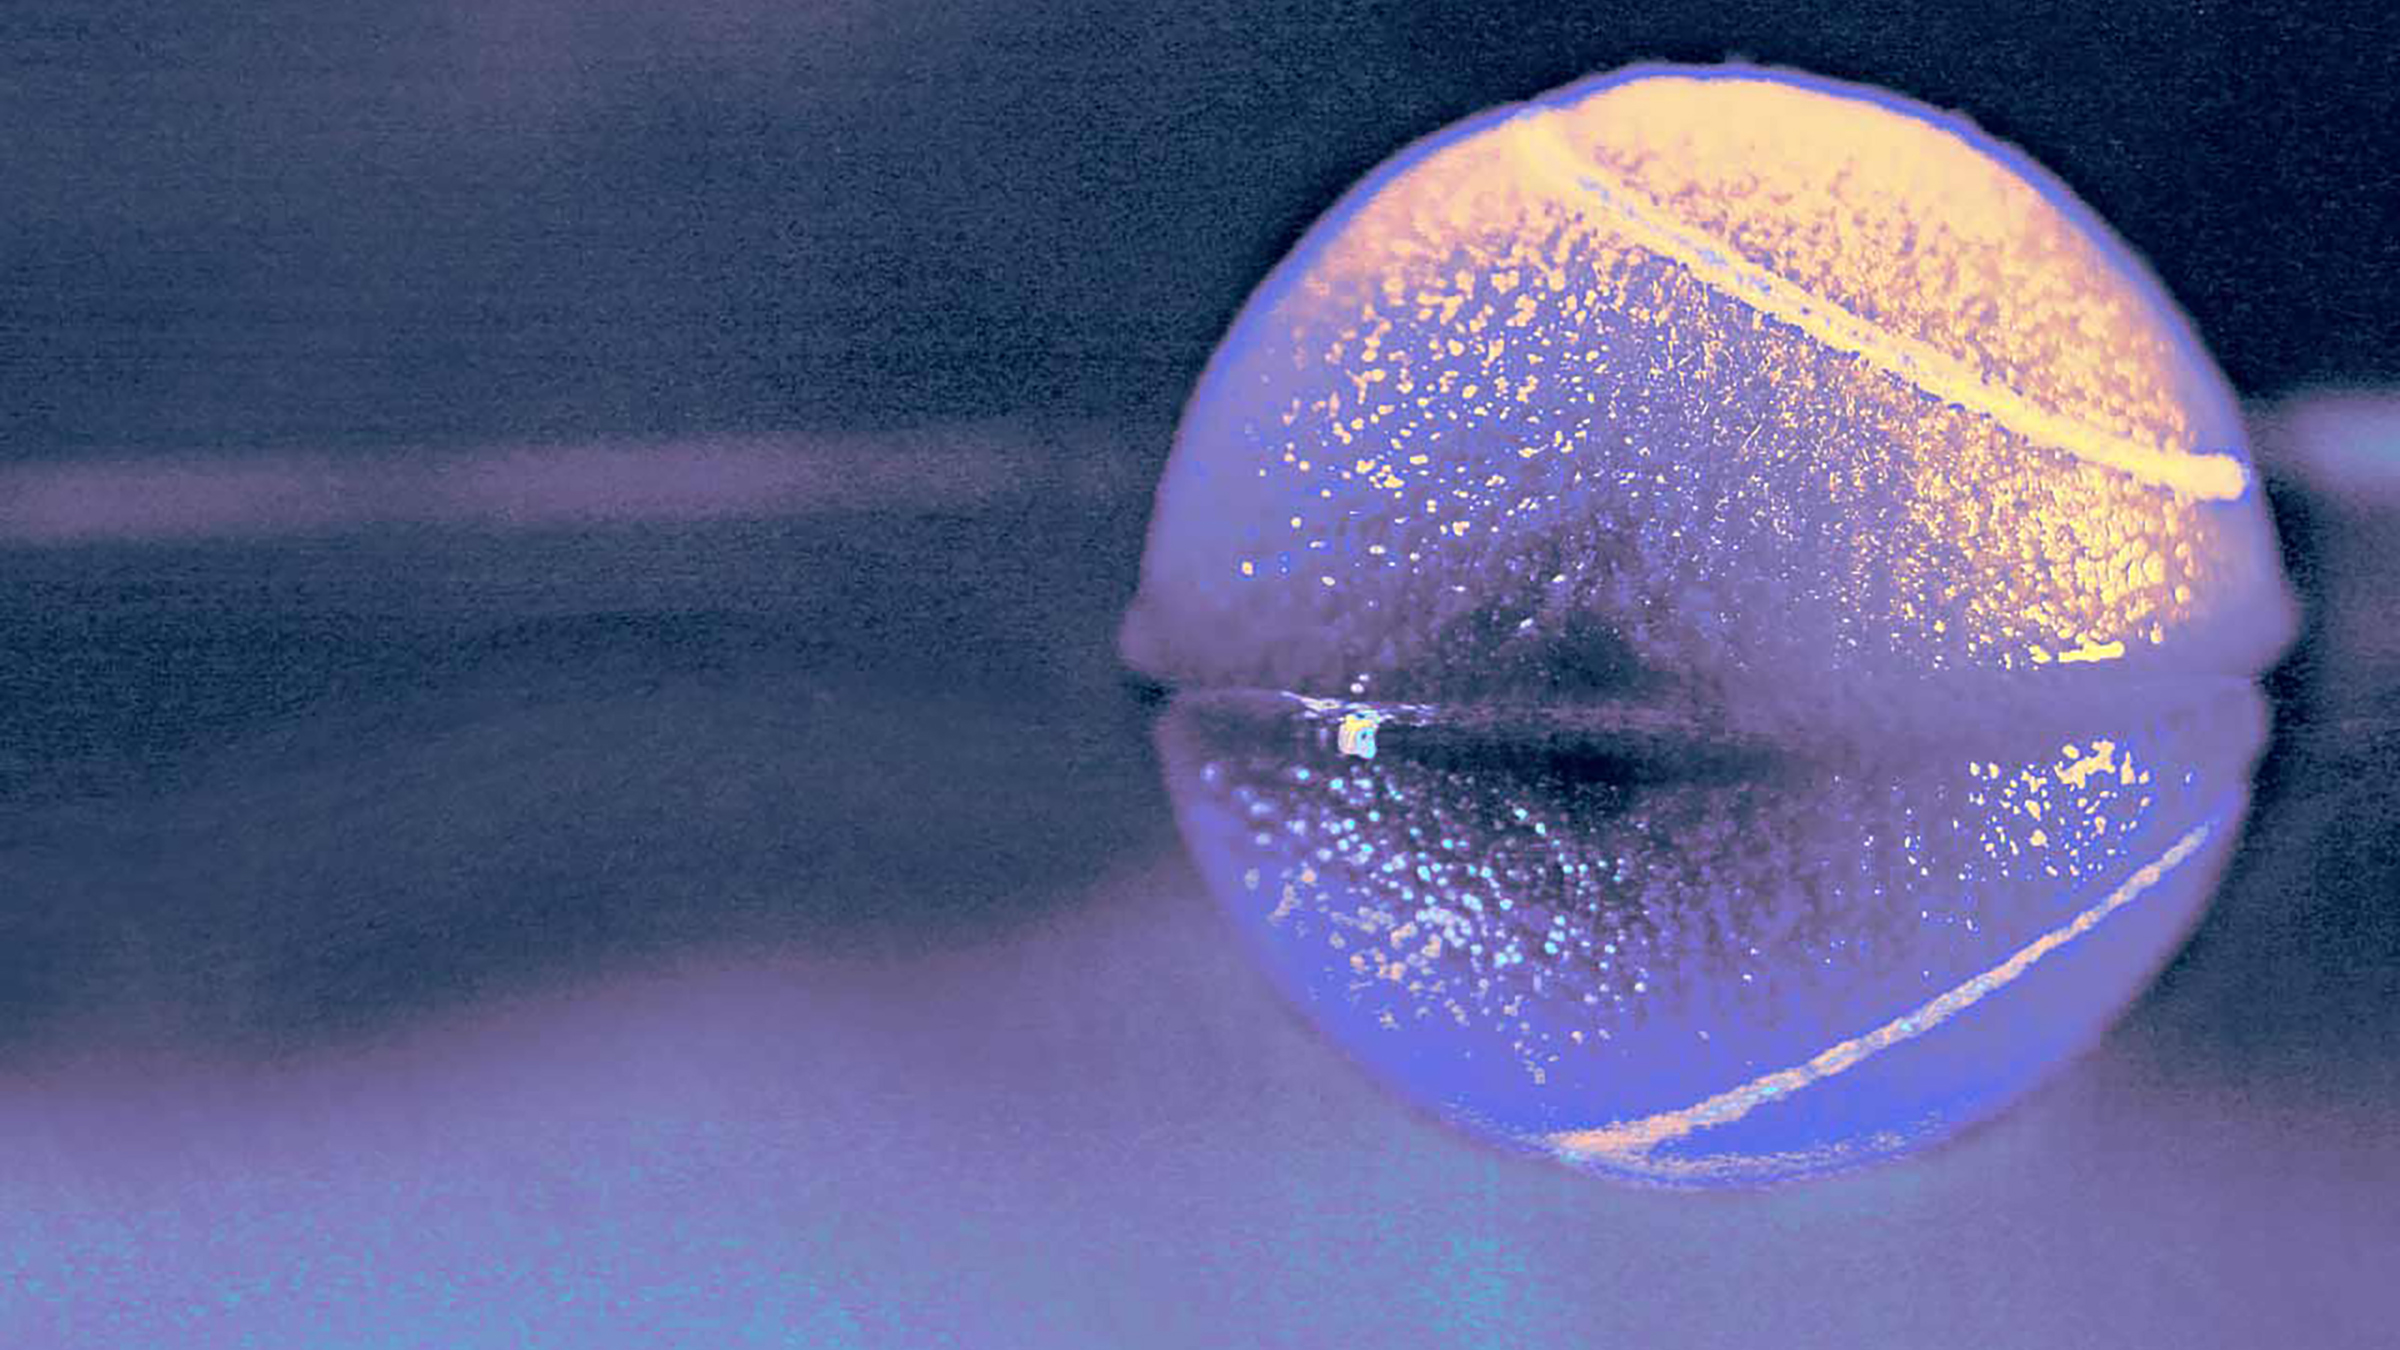 Artist’s conception of a Majorana fermion floating at the surface of the Fermi sea